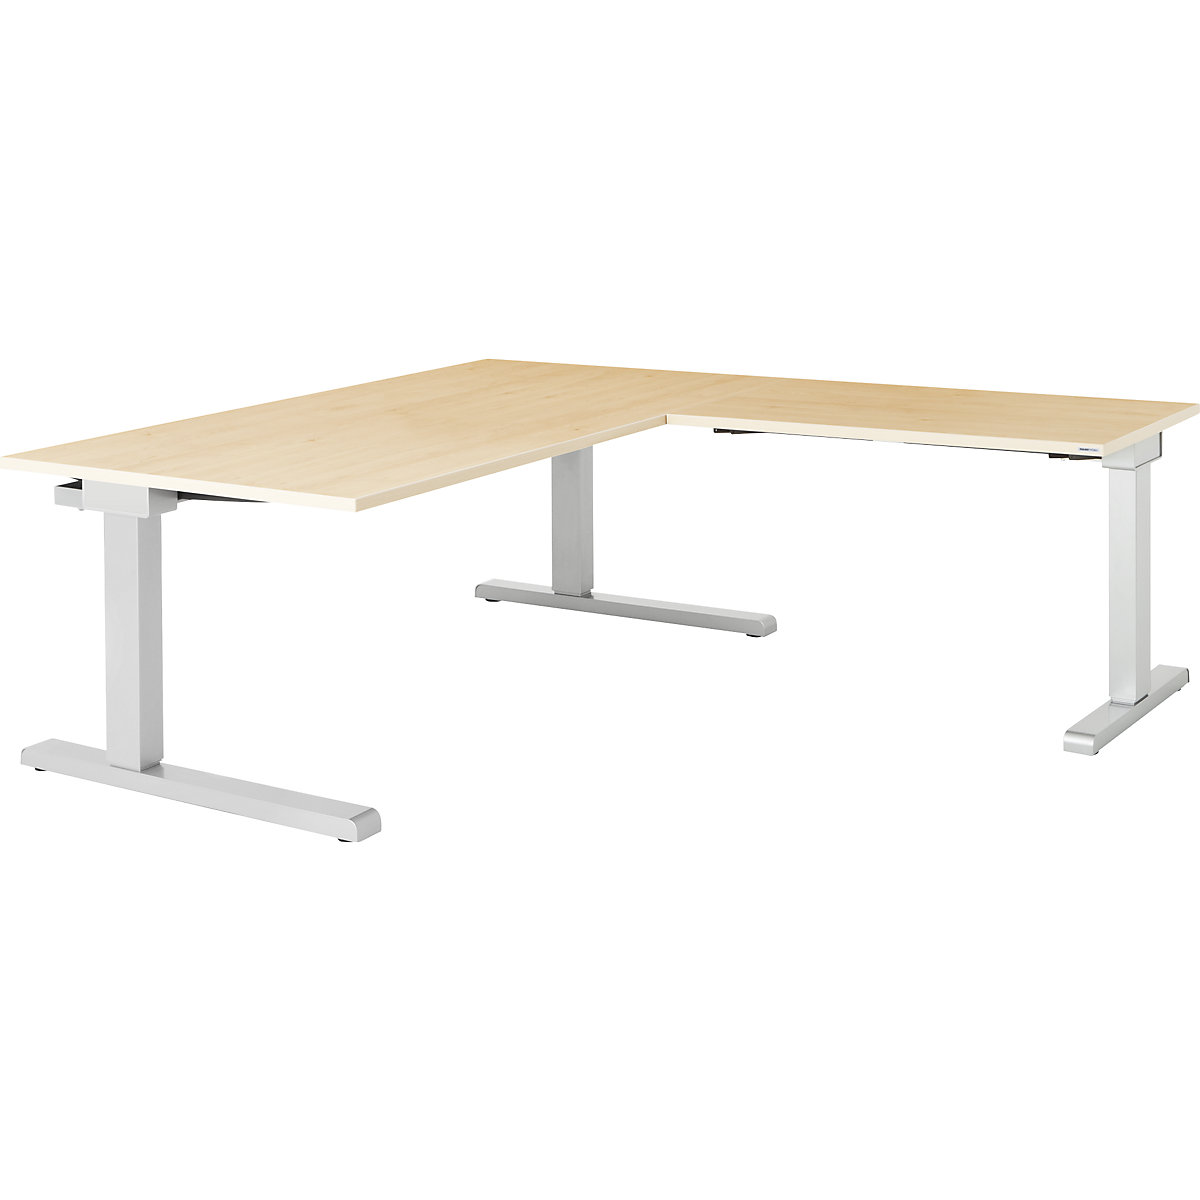 Desk, interlinked – mauser, WxD 1600 x 900 mm, angled extension on right (width 1000 mm), maple finish top, white aluminium frame-3